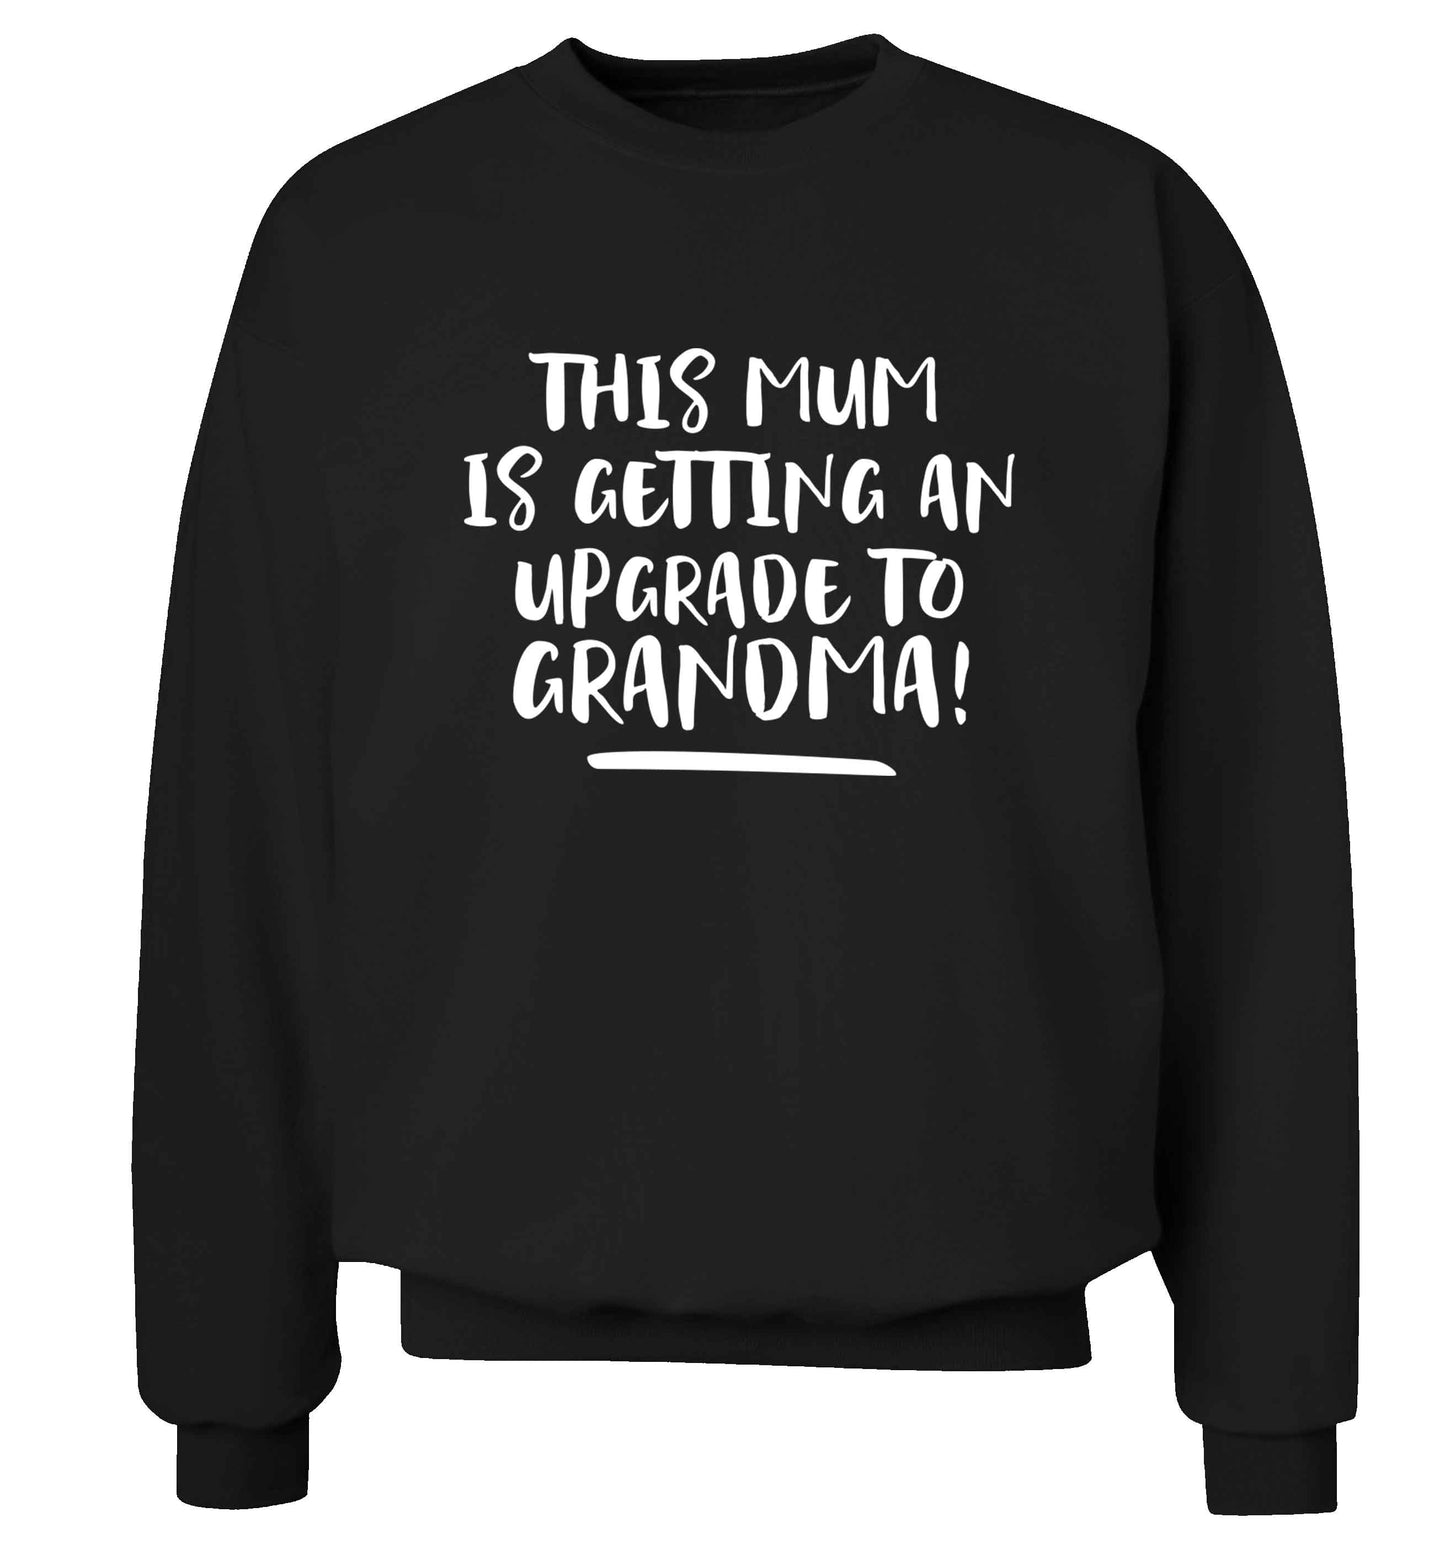 This mum is getting an upgrade to grandma! Adult's unisex black Sweater 2XL